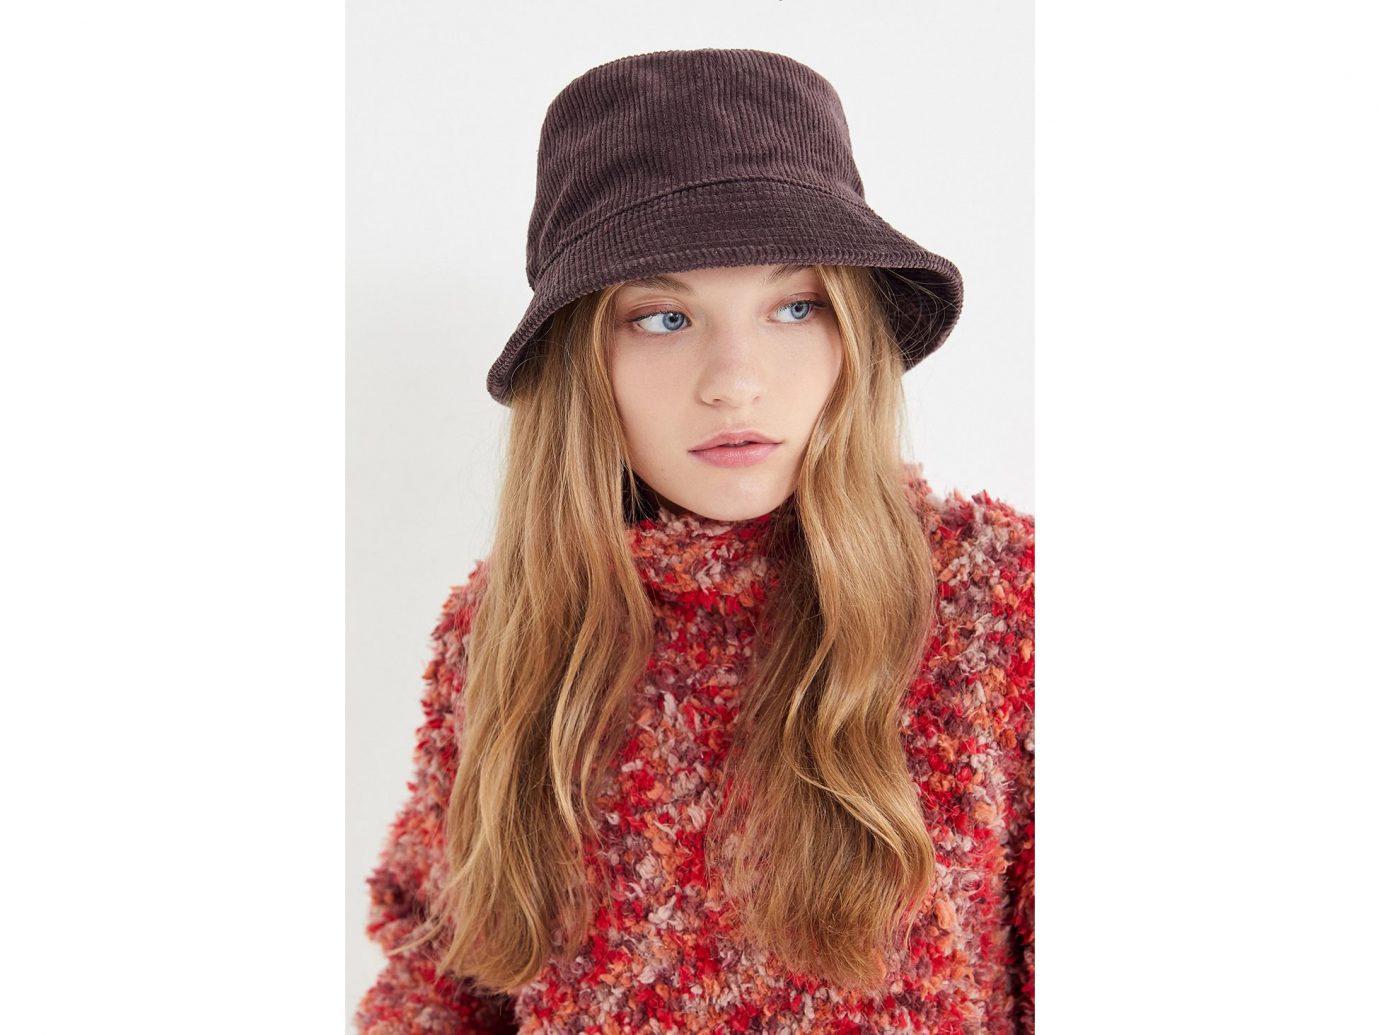 Urban Outfitters Corduroy Bucket Hat